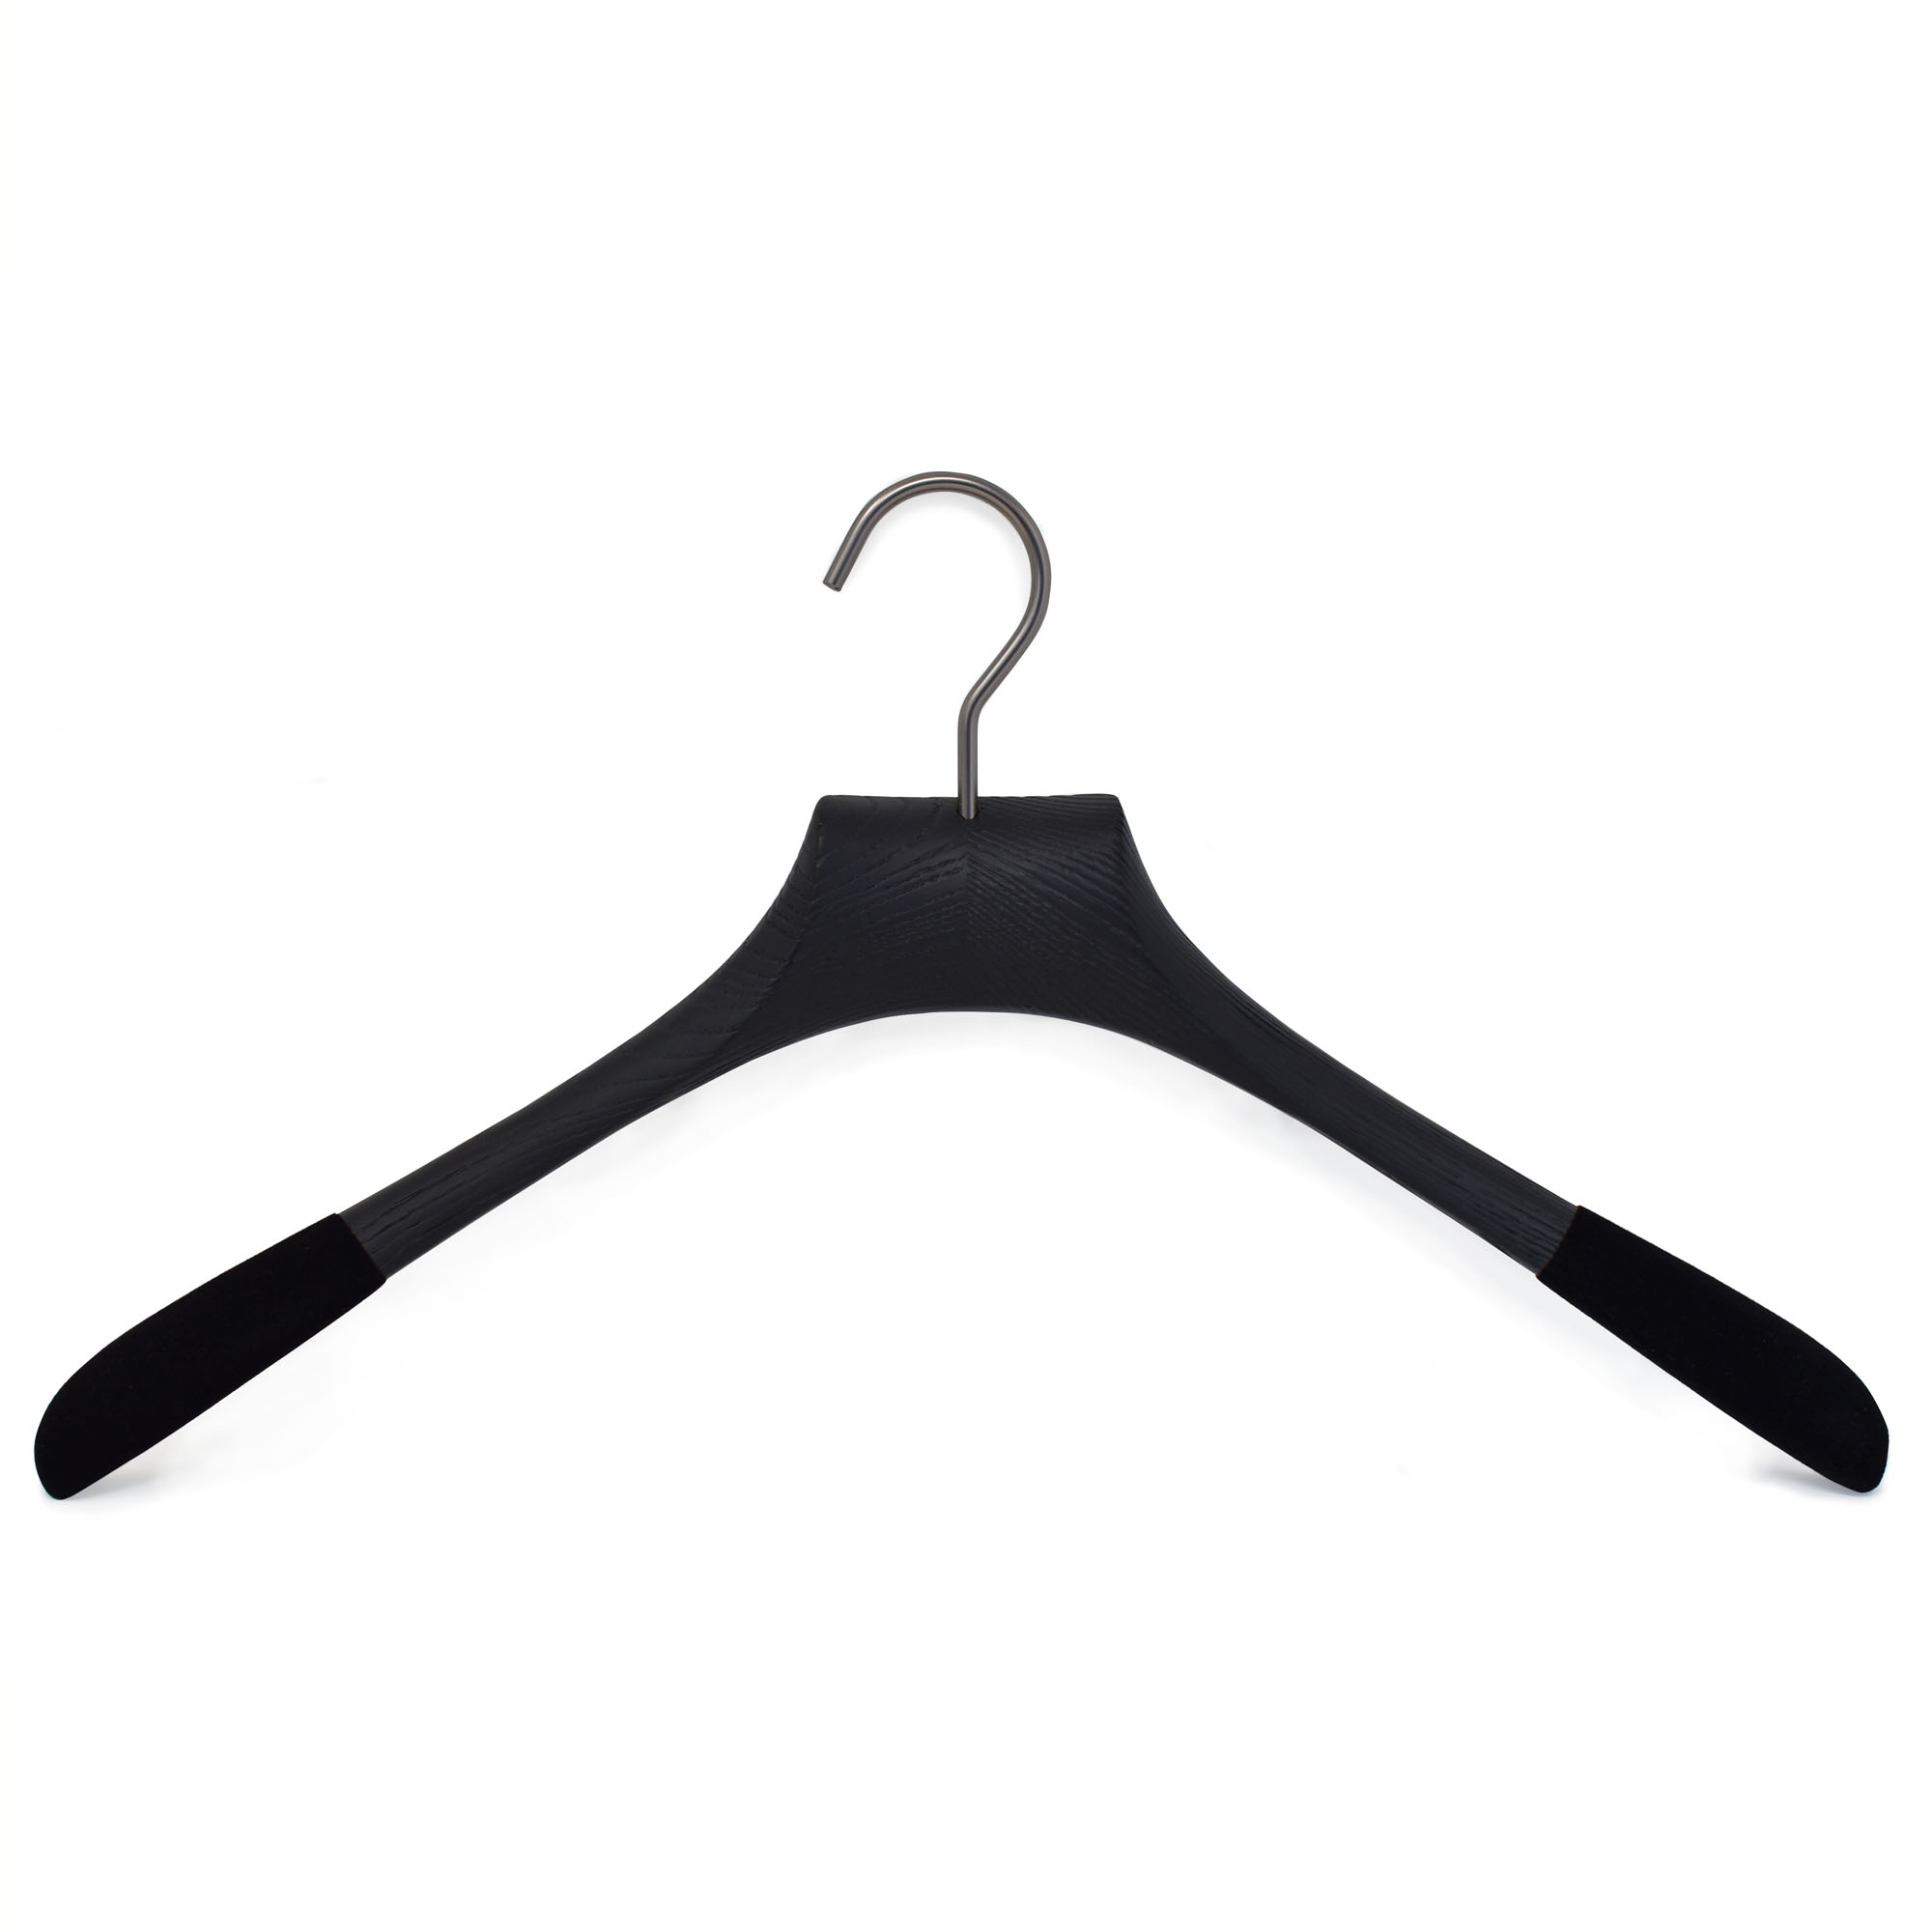 Luxury wooden hanger with anti-slip for shirts